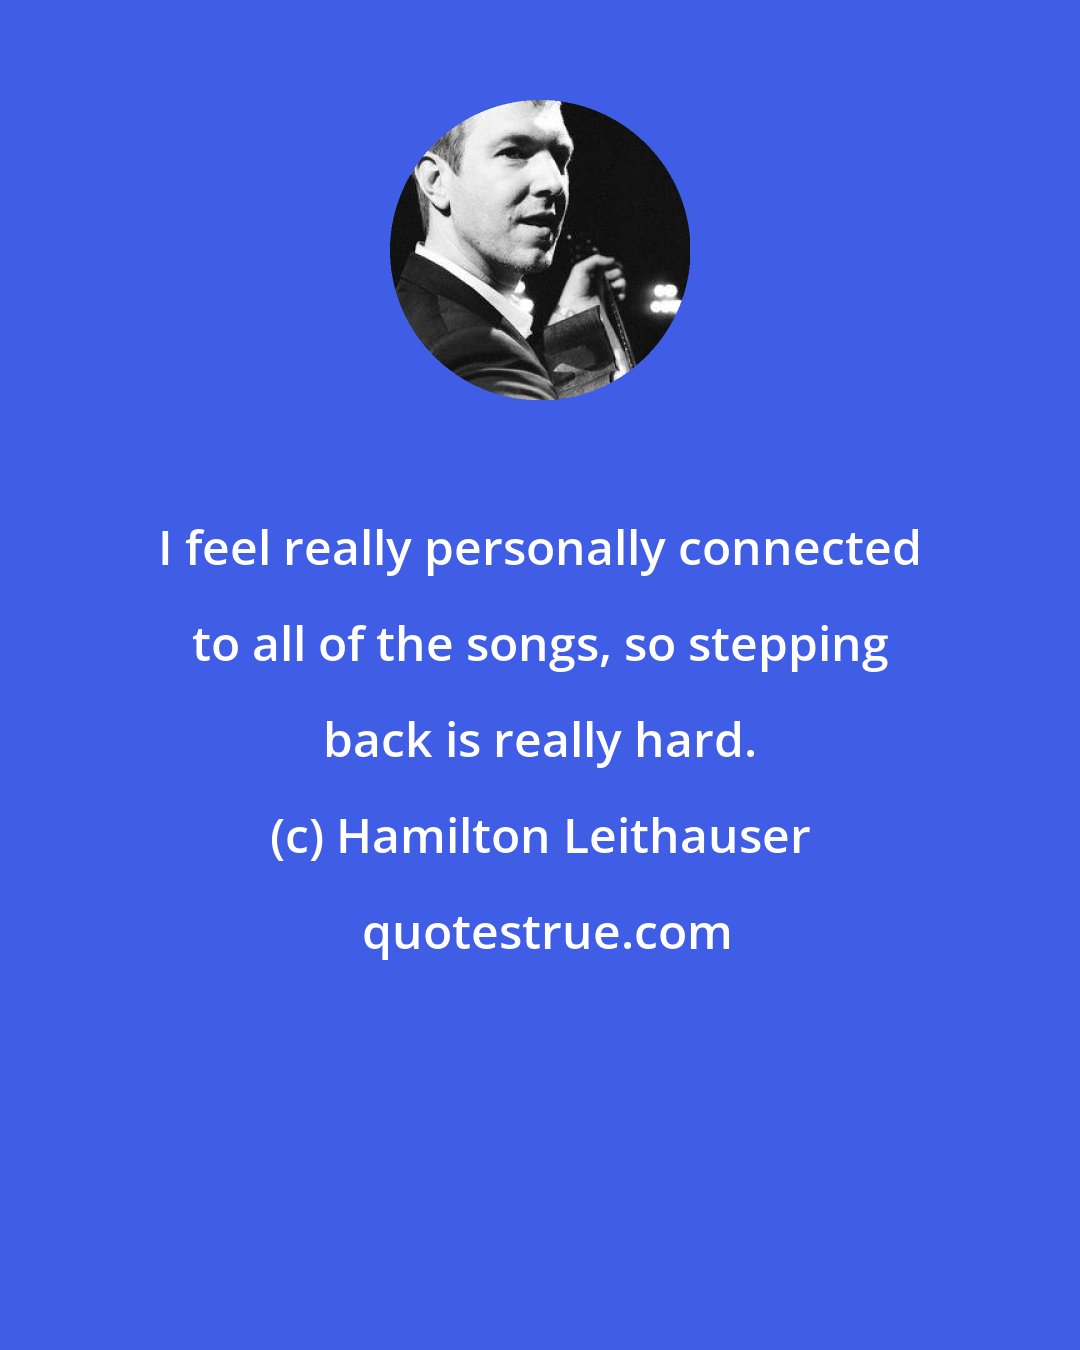 Hamilton Leithauser: I feel really personally connected to all of the songs, so stepping back is really hard.